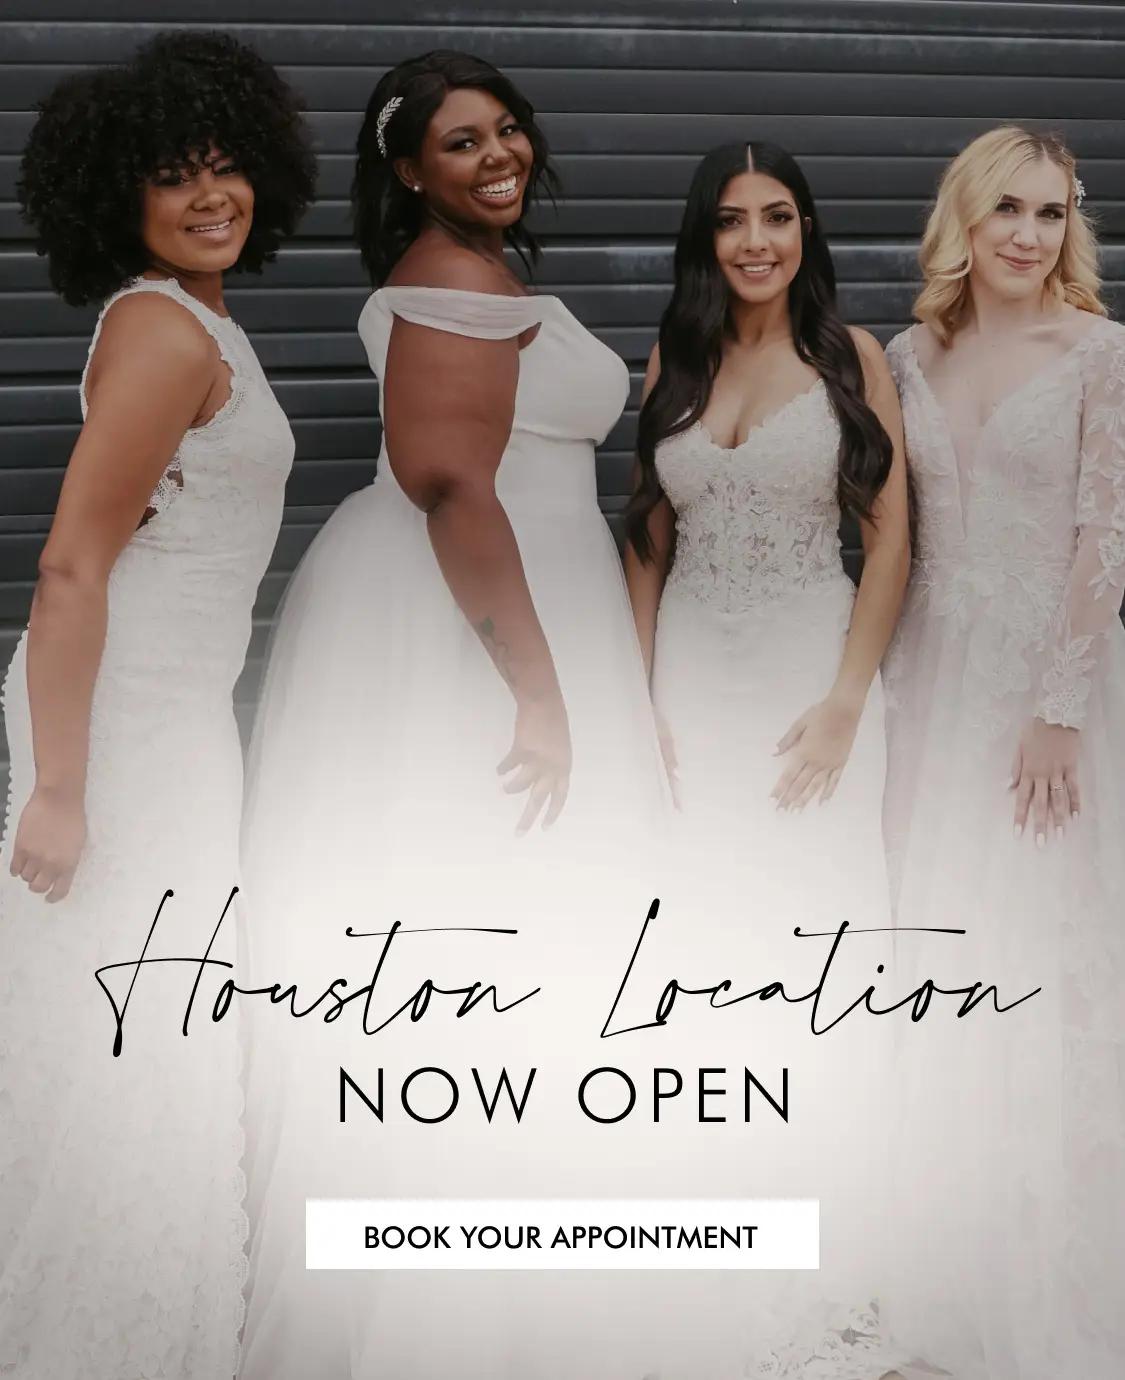 Best Bridal Salons In Houston Top 11 Places To Find Your Dream Dress